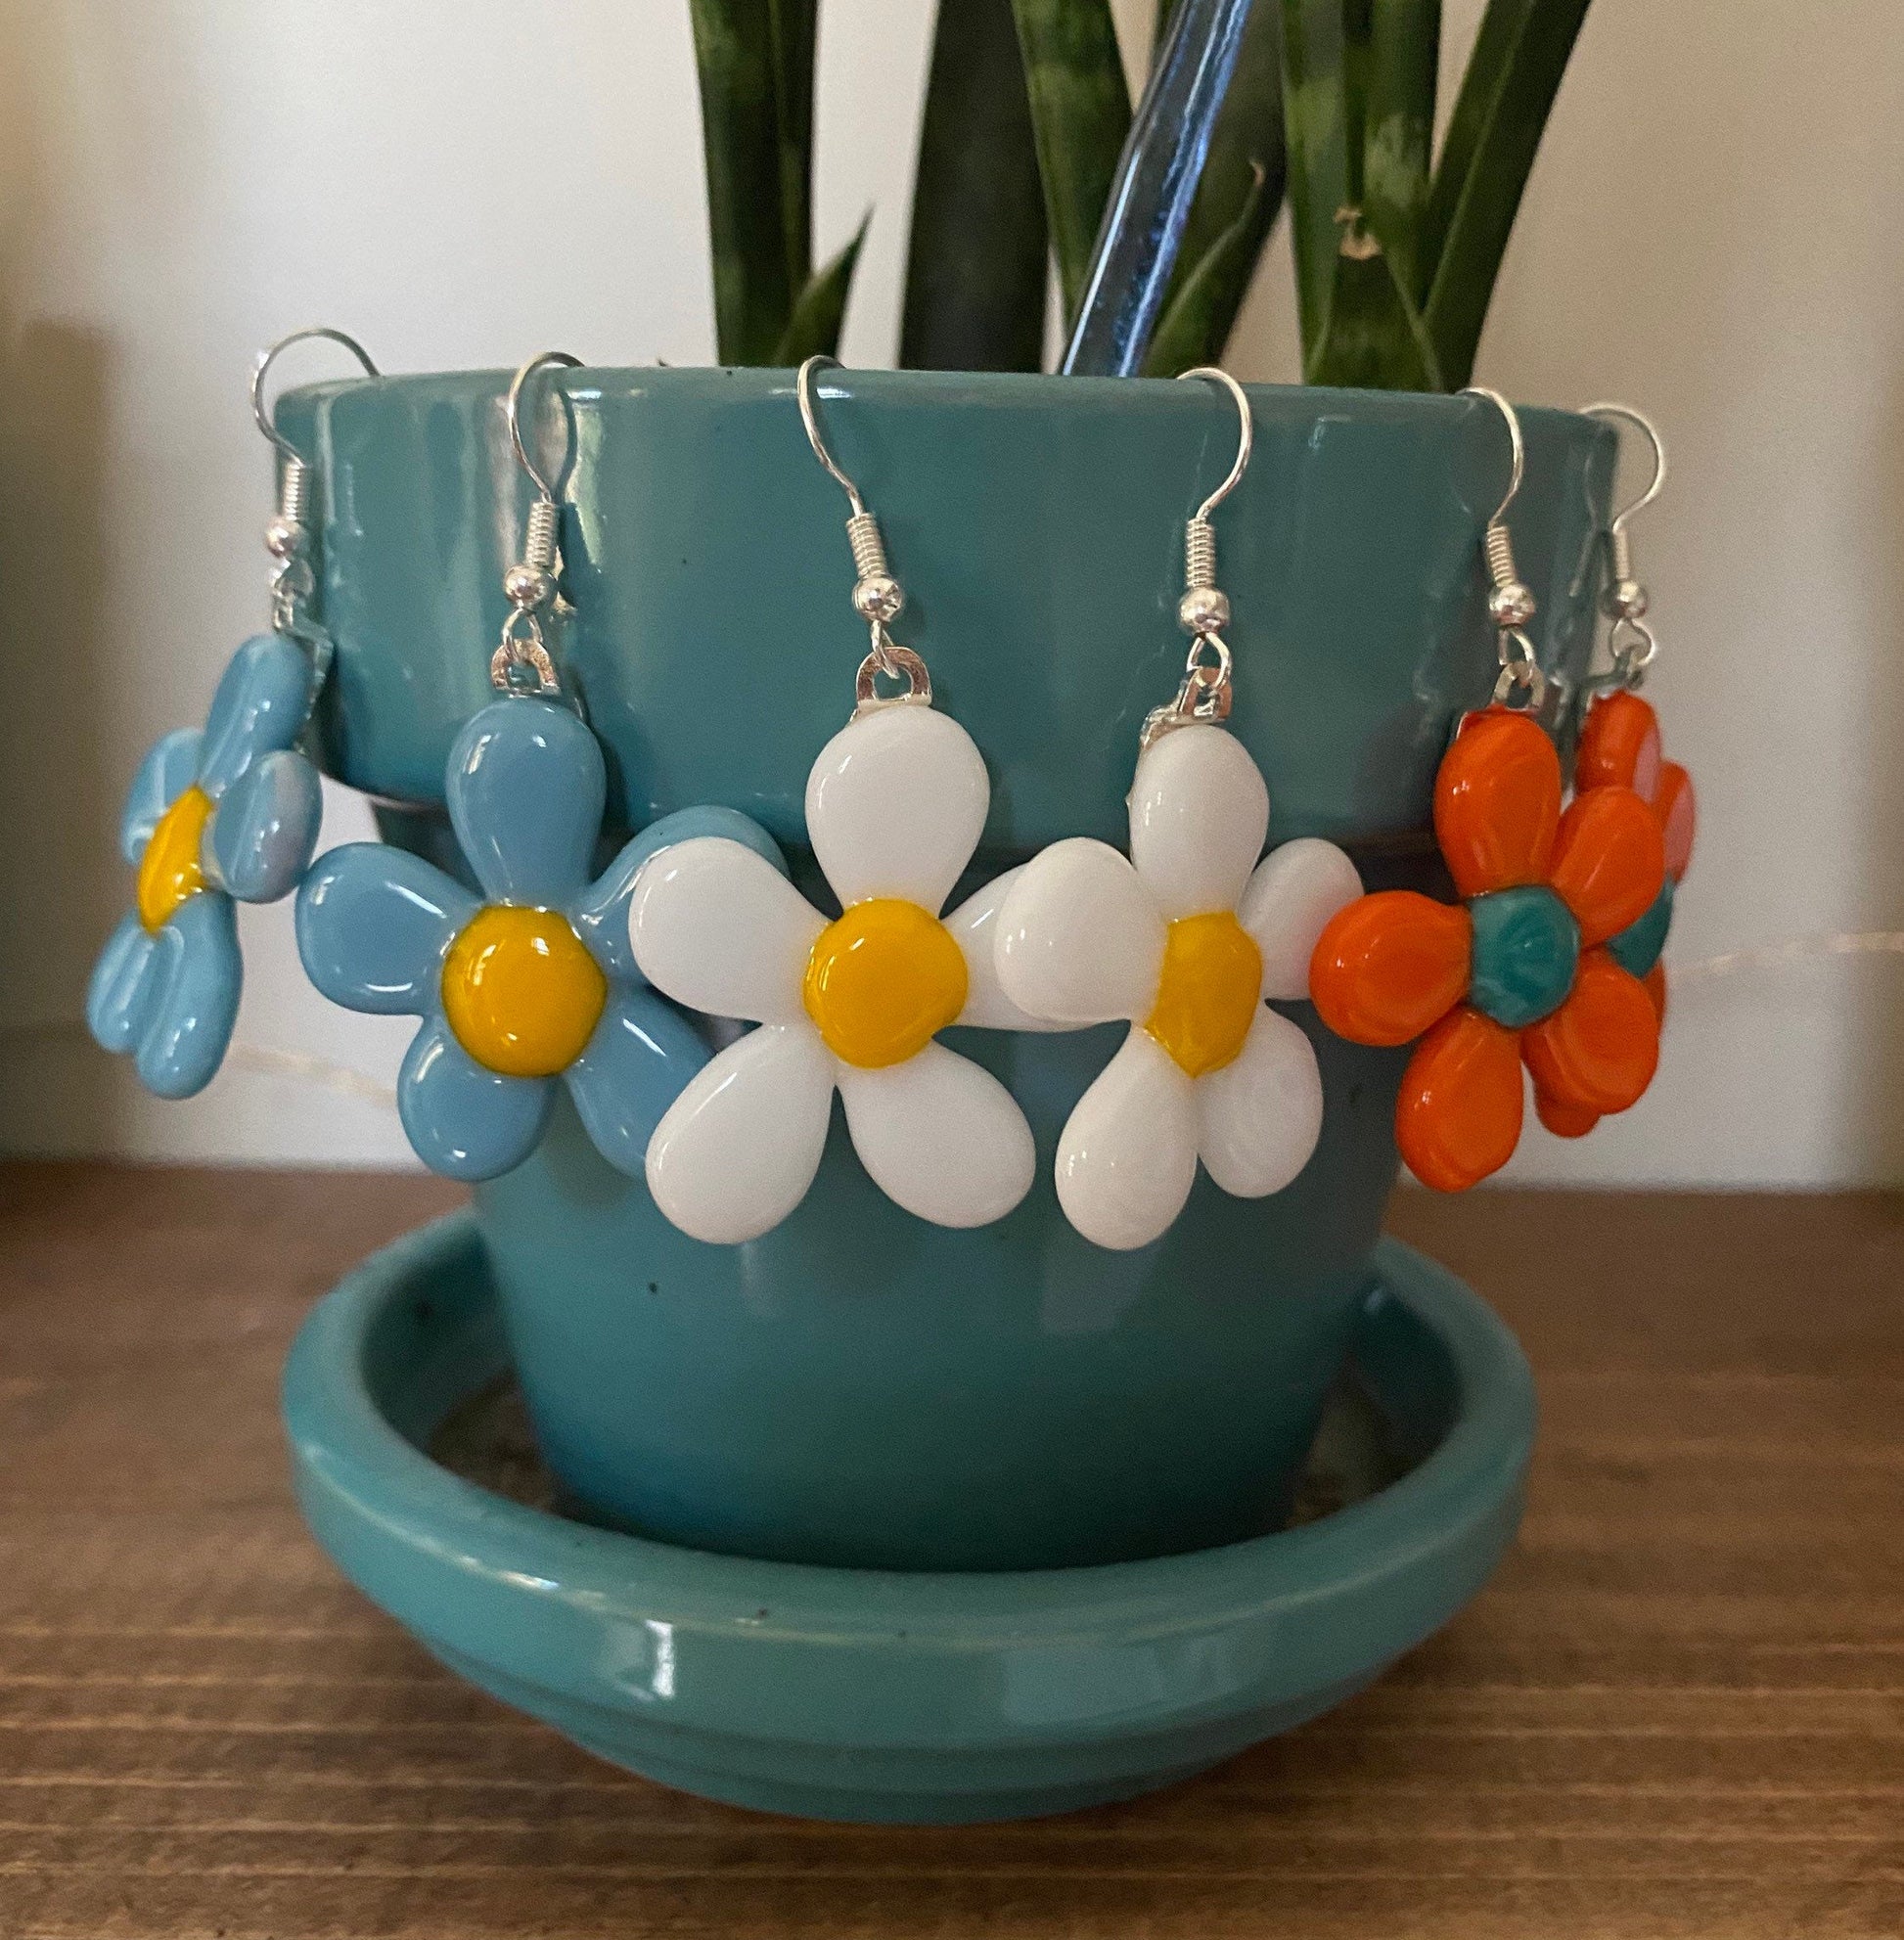 The Hanging Daisy Earring Display